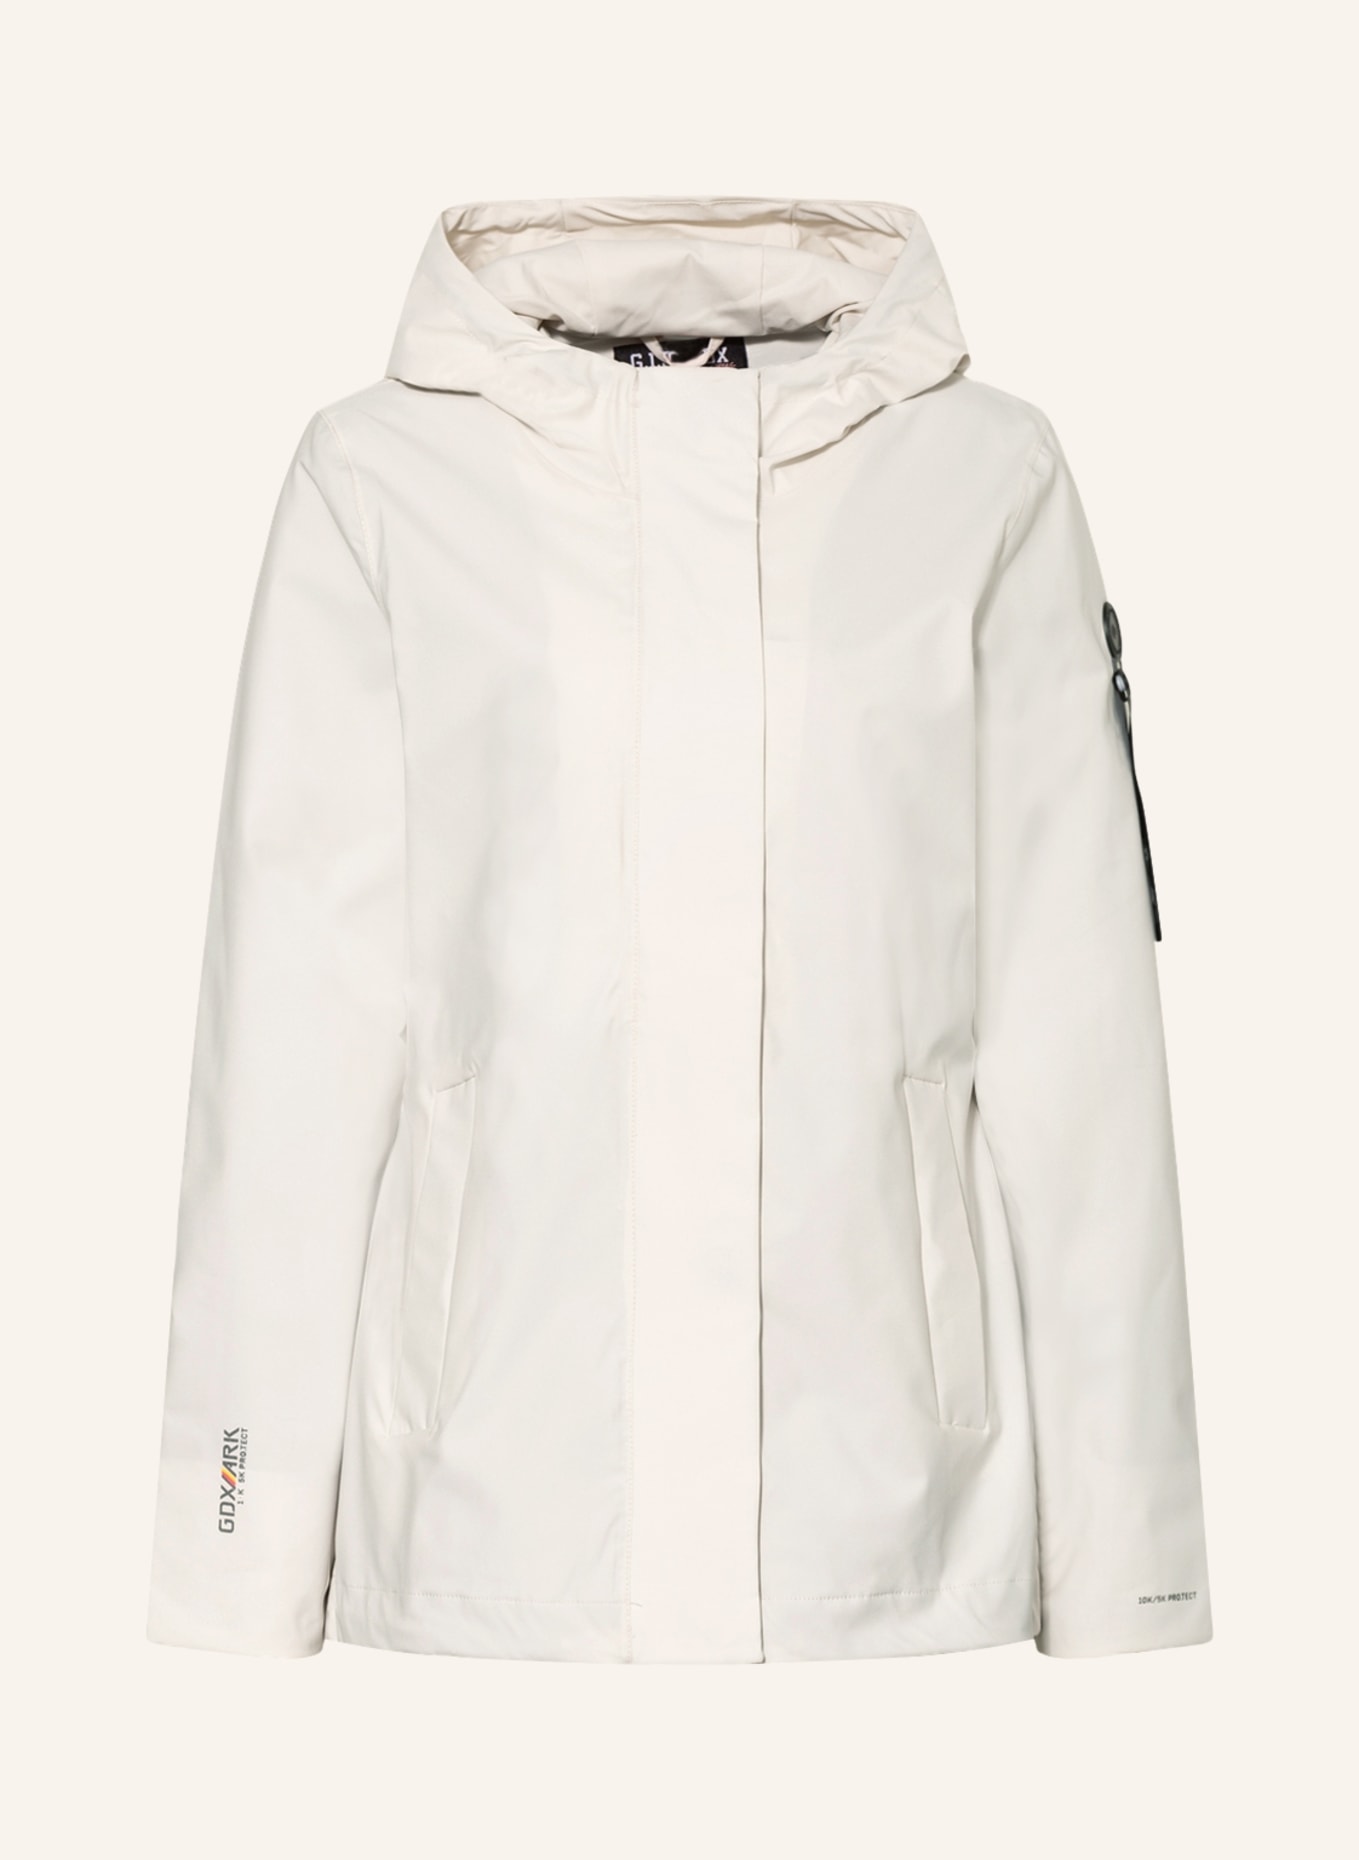 G.I.G.A. DX by killtec 152 Outdoor in cream jacket GS